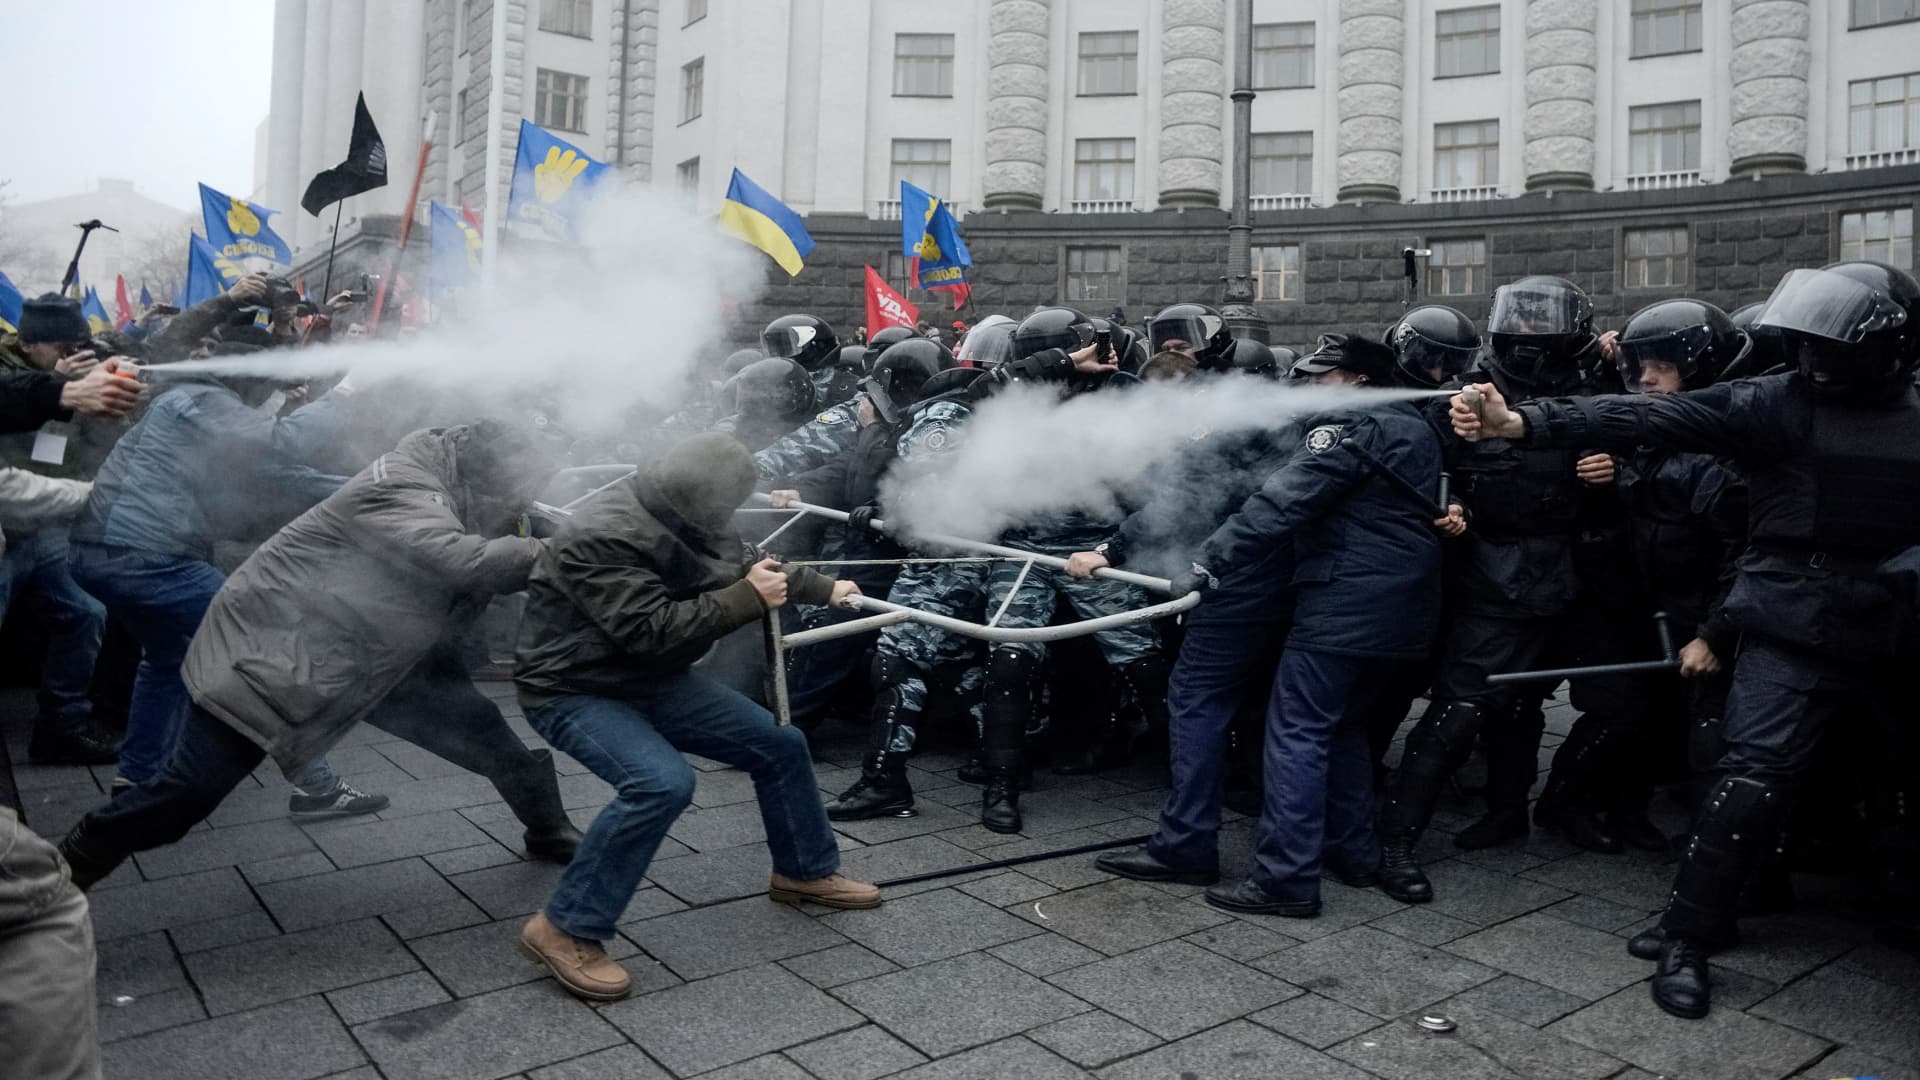 FILE PHOTO: Protesters clash with riot police during a rally to support EU integration in central Kyiv, Ukraine, November 24, 2013. Tens of thousands of supporters of Ukraine's European integration flooded central Kiev on Sunday to protest against the government's decision to drop plans to sign a landmark deal with the European Union in Vilnius on November 29 and to revive talks on ties with Russia. 